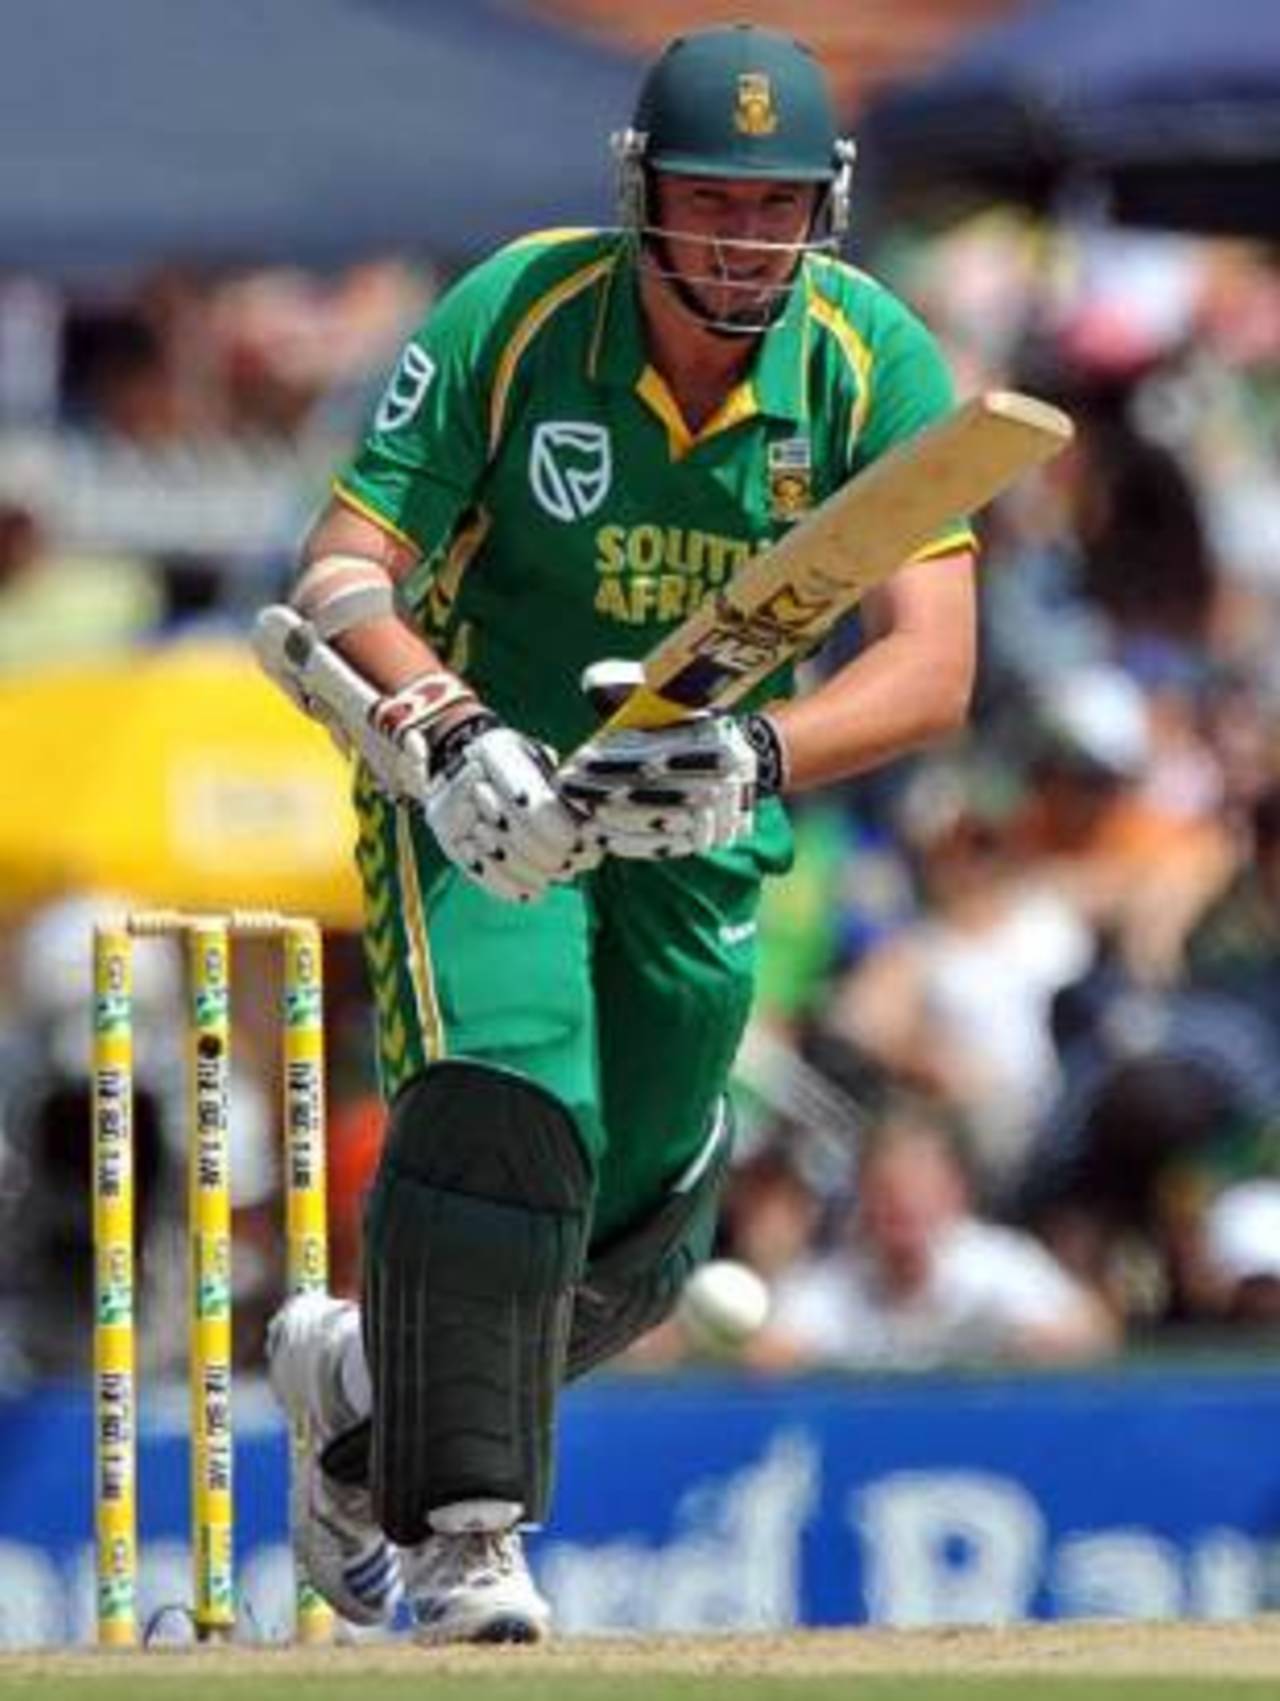 Graeme Smith on-drives during his innings of 40, South Africa v Australia, 2nd ODI, Centurion, April 5, 2009 